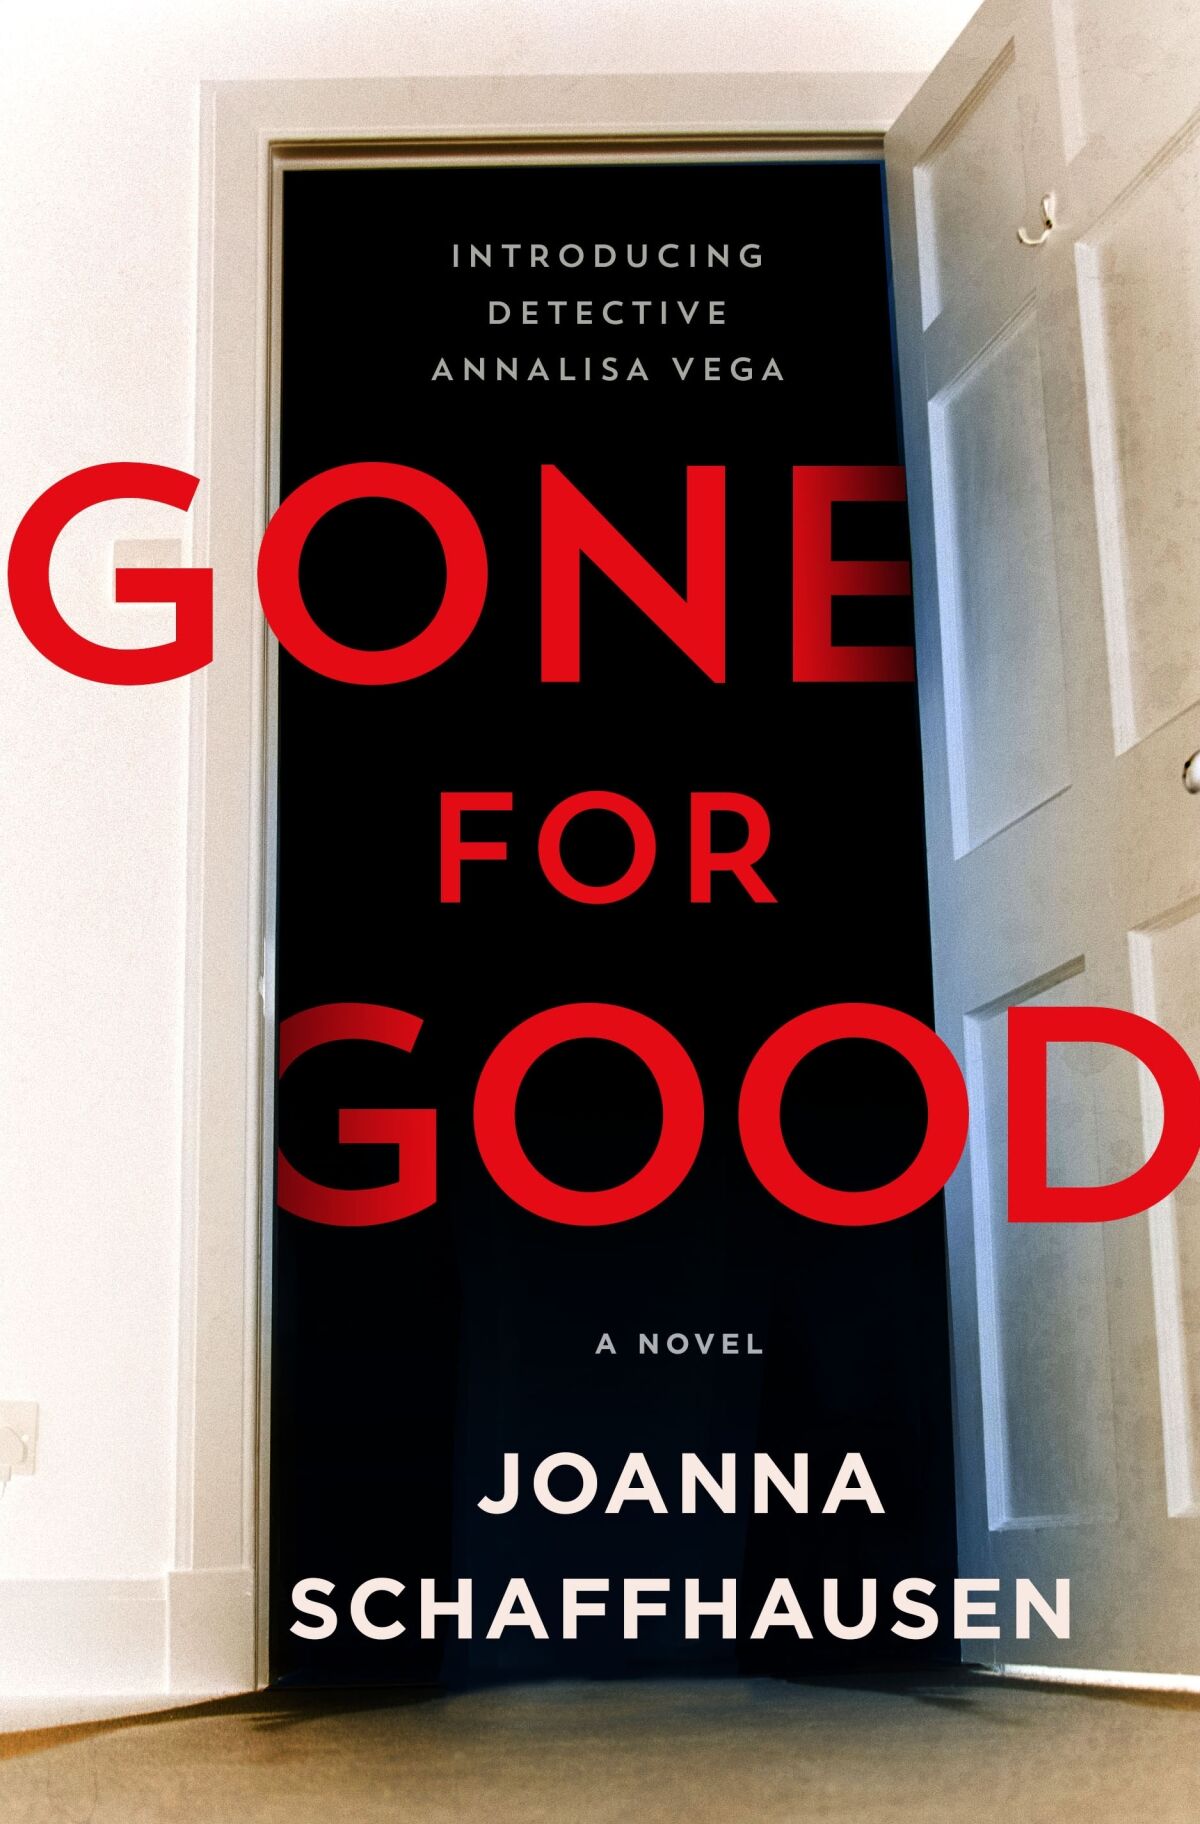 This image released by St. Martin's Press shows "Gone For Good" by Joanna Schaffhausen. (St. Martin's Press via AP)